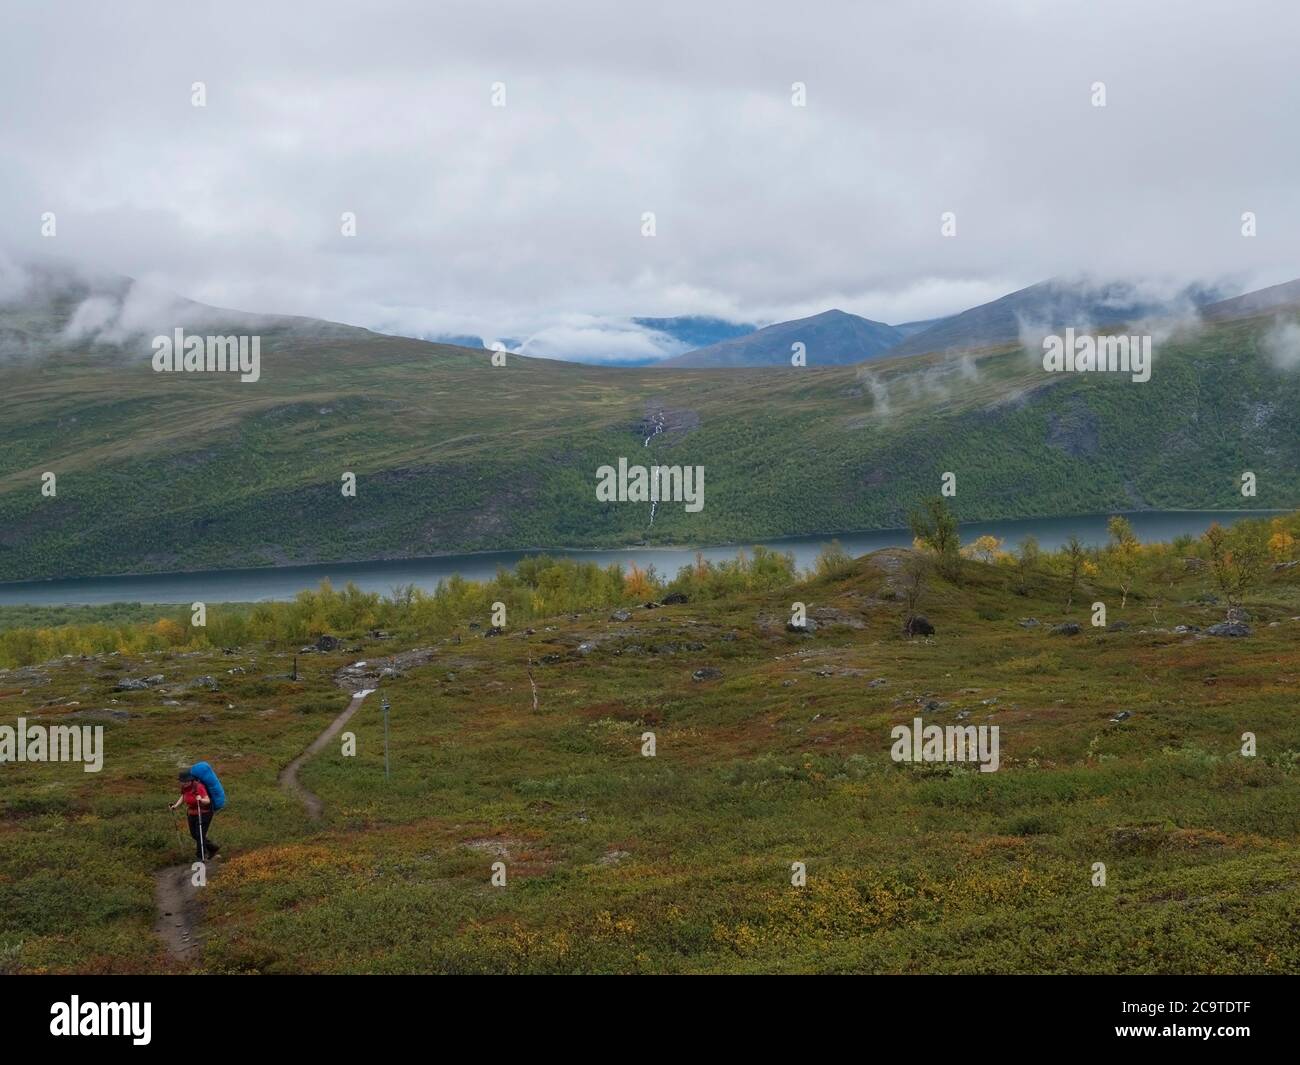 Senior woman hiker at Kungsleden hiking trail with Lapland nature with green mountains, Teusajaure lake, rock boulders, autumn colored bushes, birch t Stock Photo